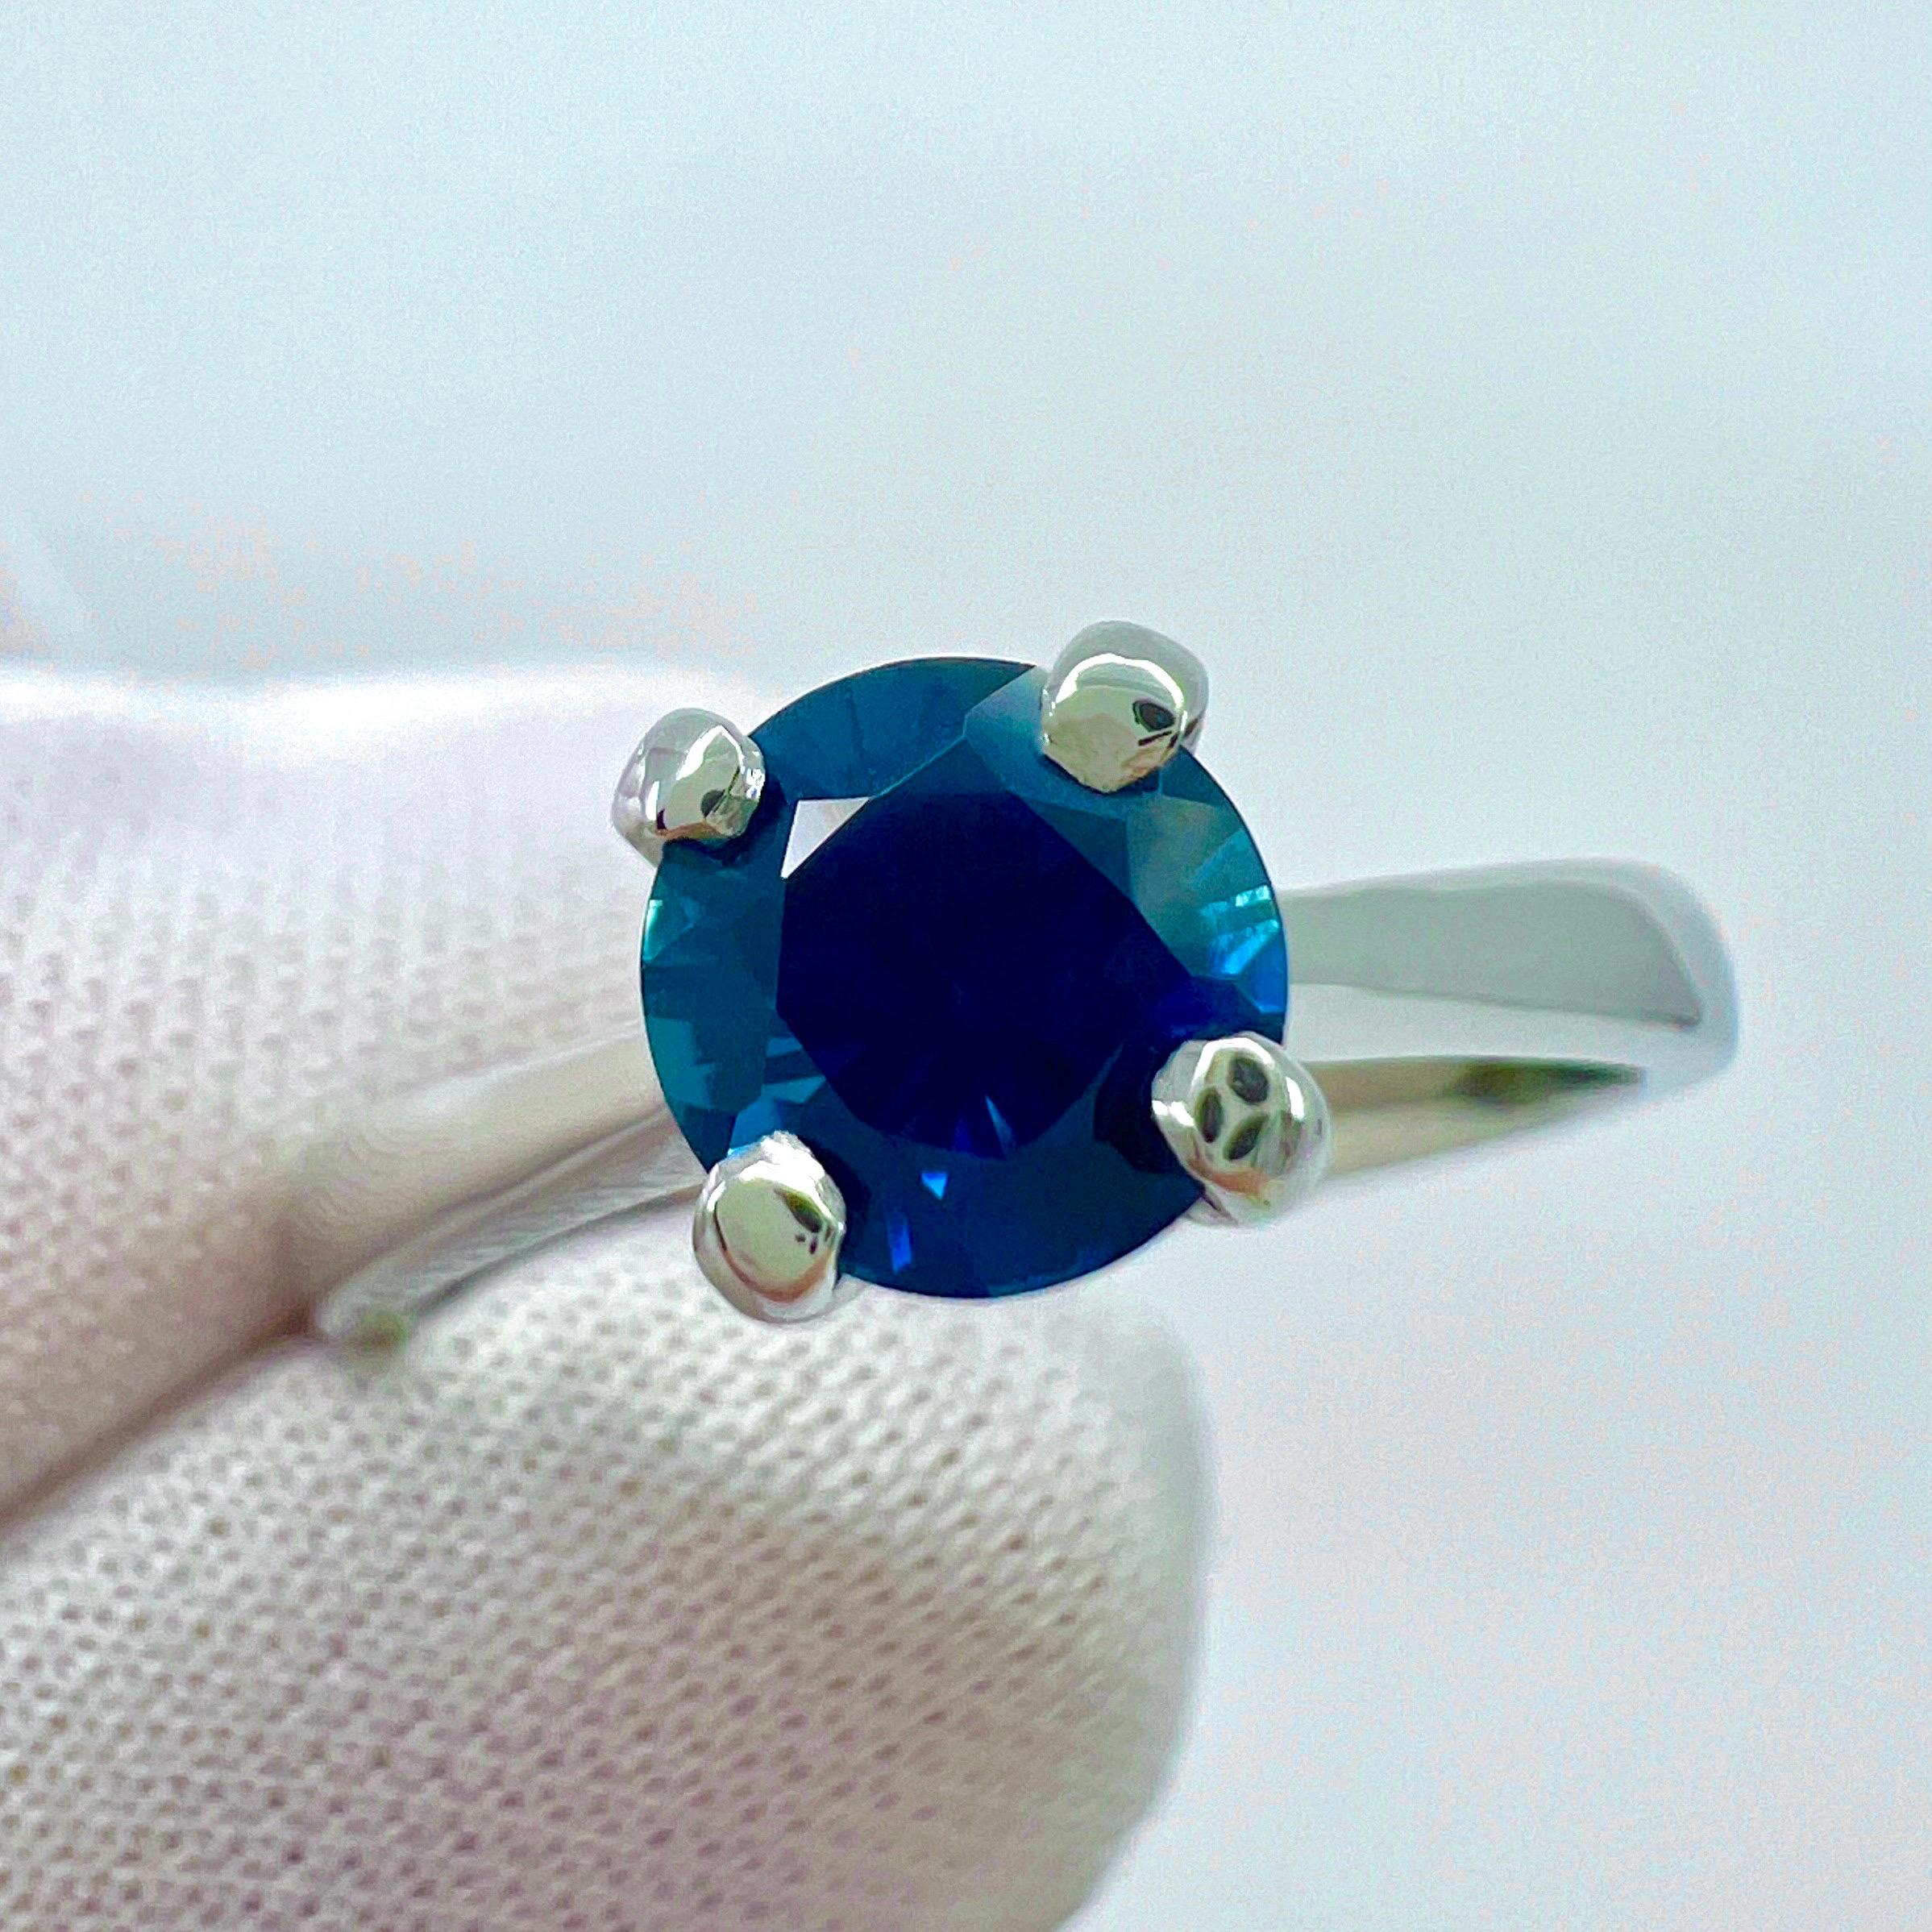 Natural Deep Blue Sapphire 950 Platinum Solitaire Ring.

Natural deep blue Australian blue sapphire set in a beautiful 950 platinum solitaire ring.

1.02 carat stone with a deep blue colour and excellent clarity, a very clean stone.
Also has an